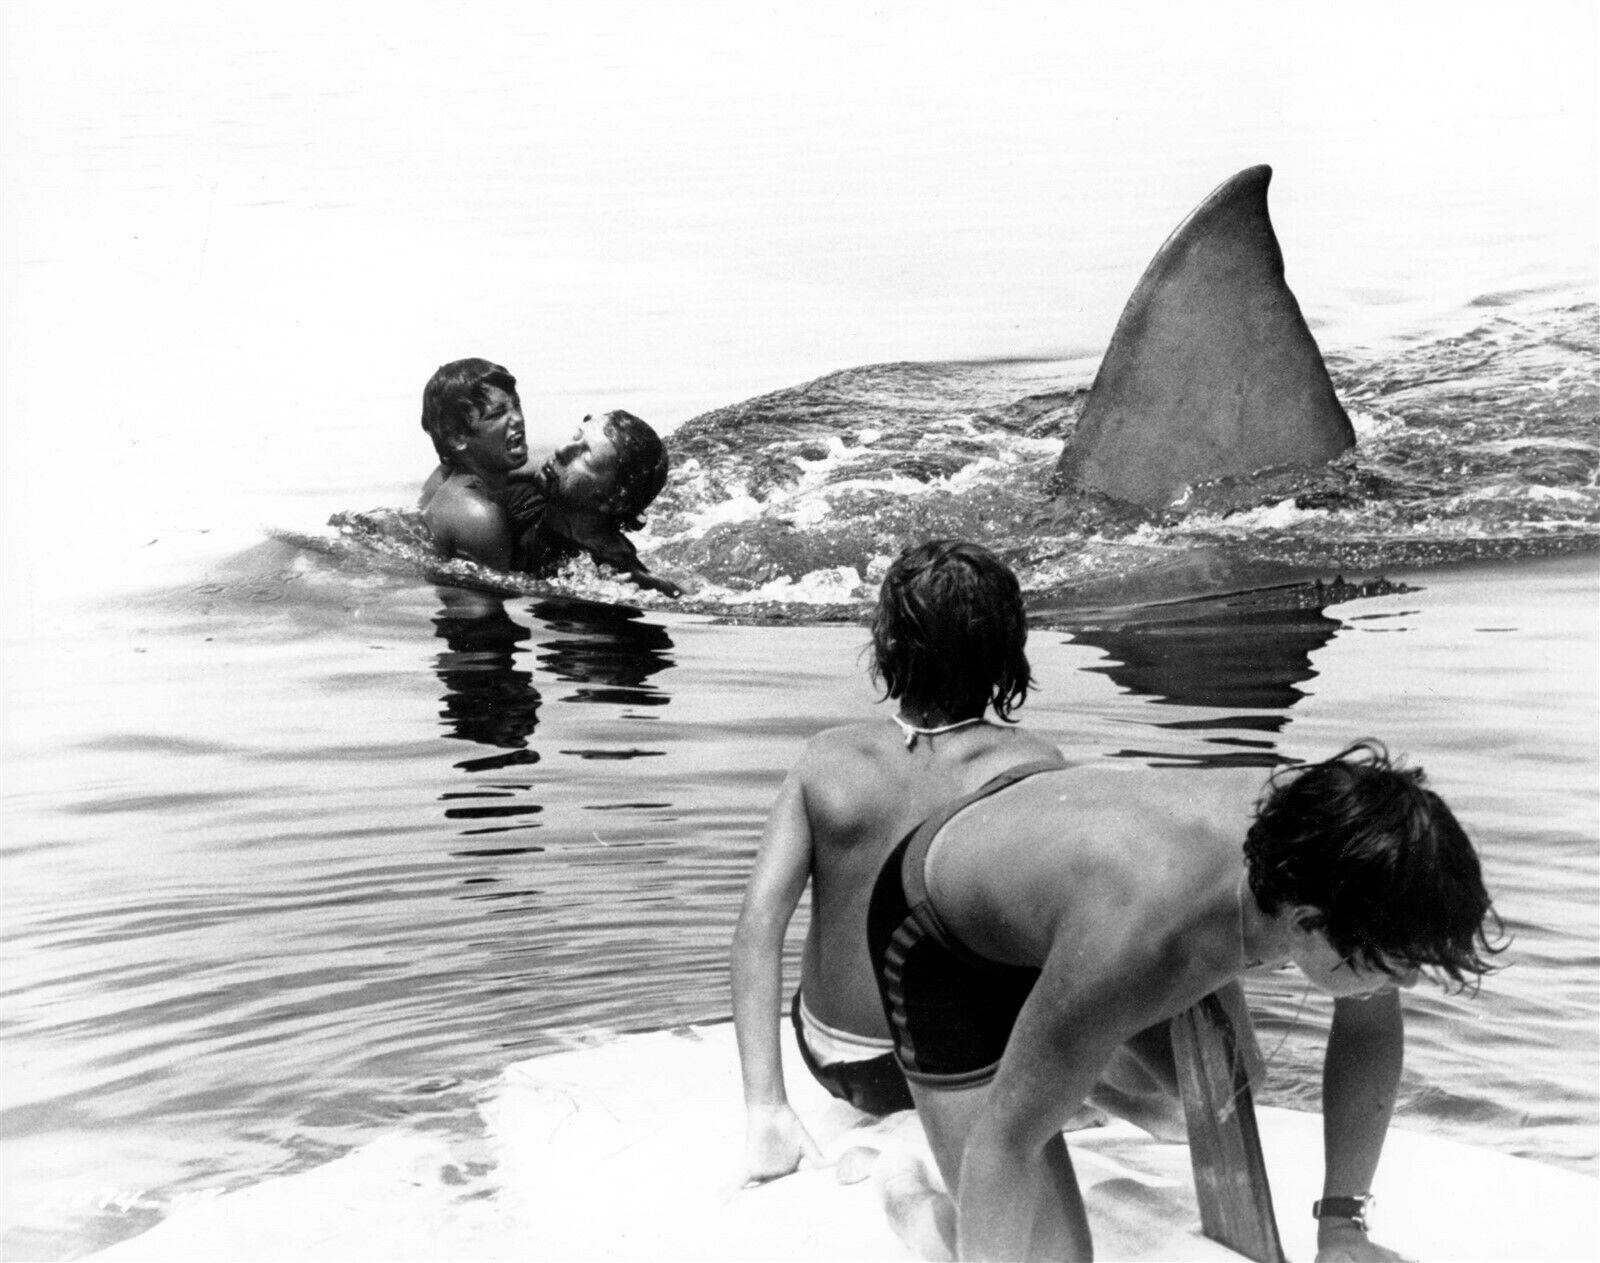 Jaws 1976 shark moves in to attack boys on boat 16x20 poster